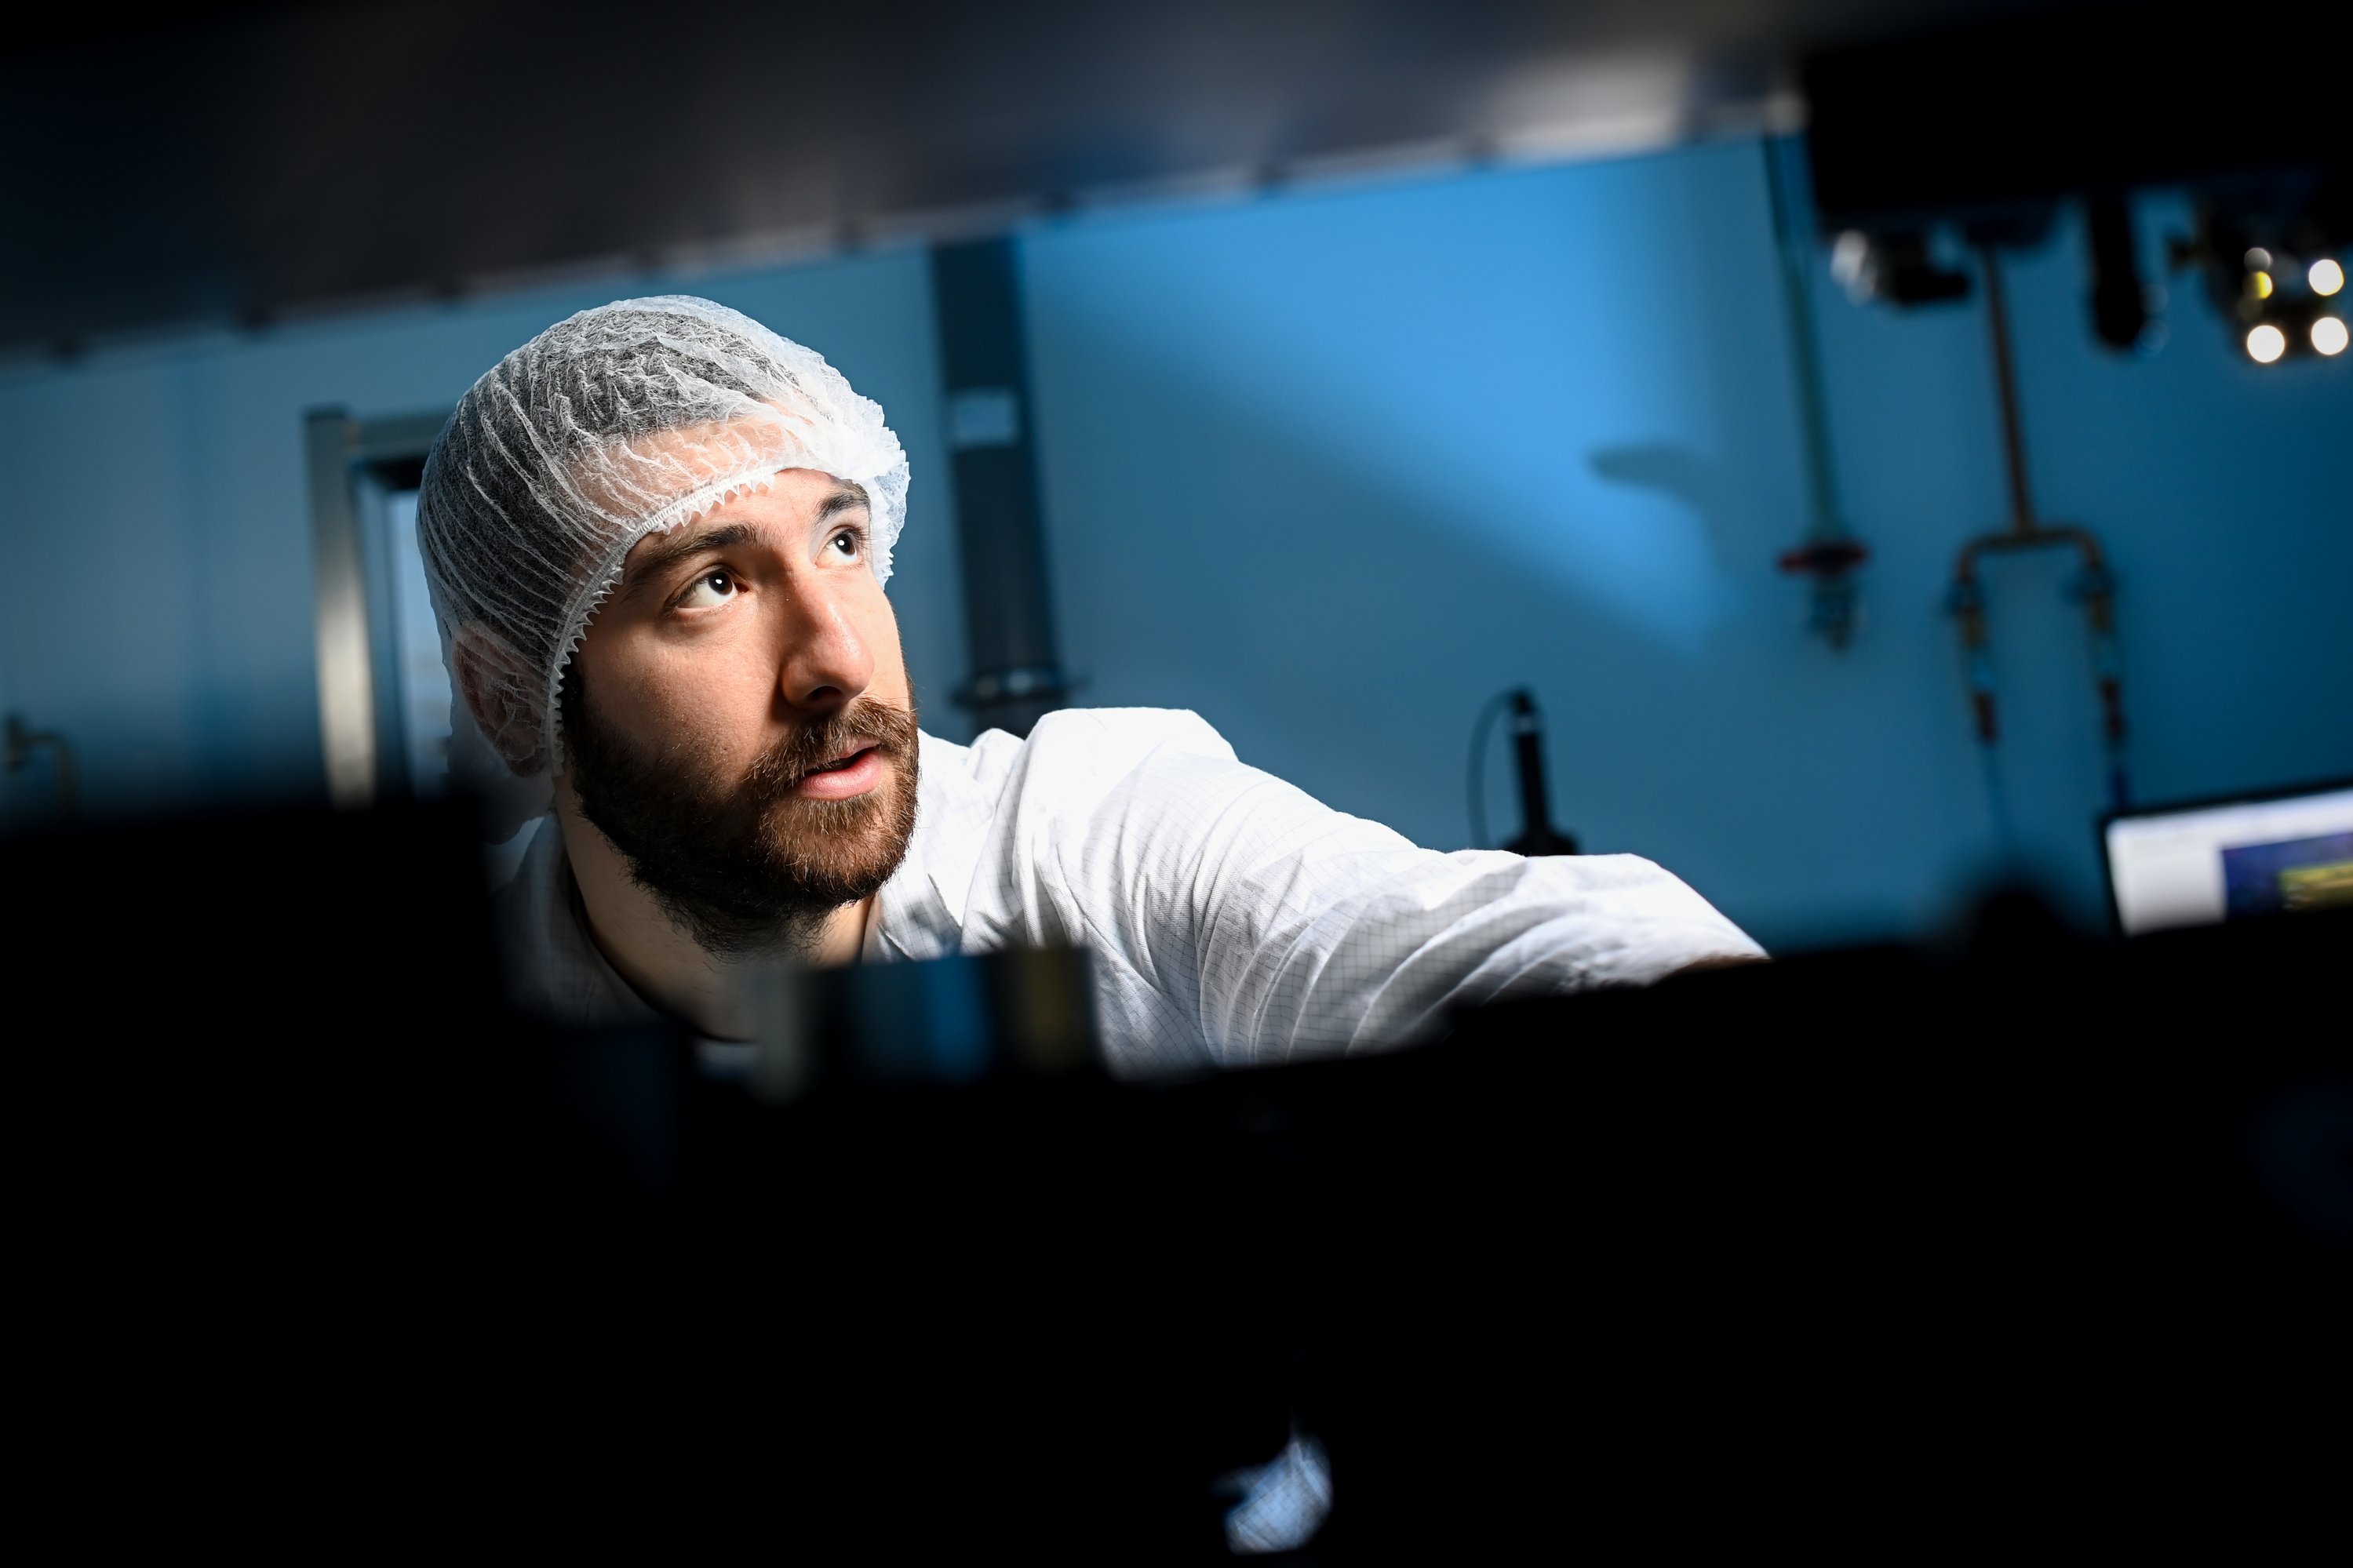 researcher in the cleanroom, wearing protective clothing